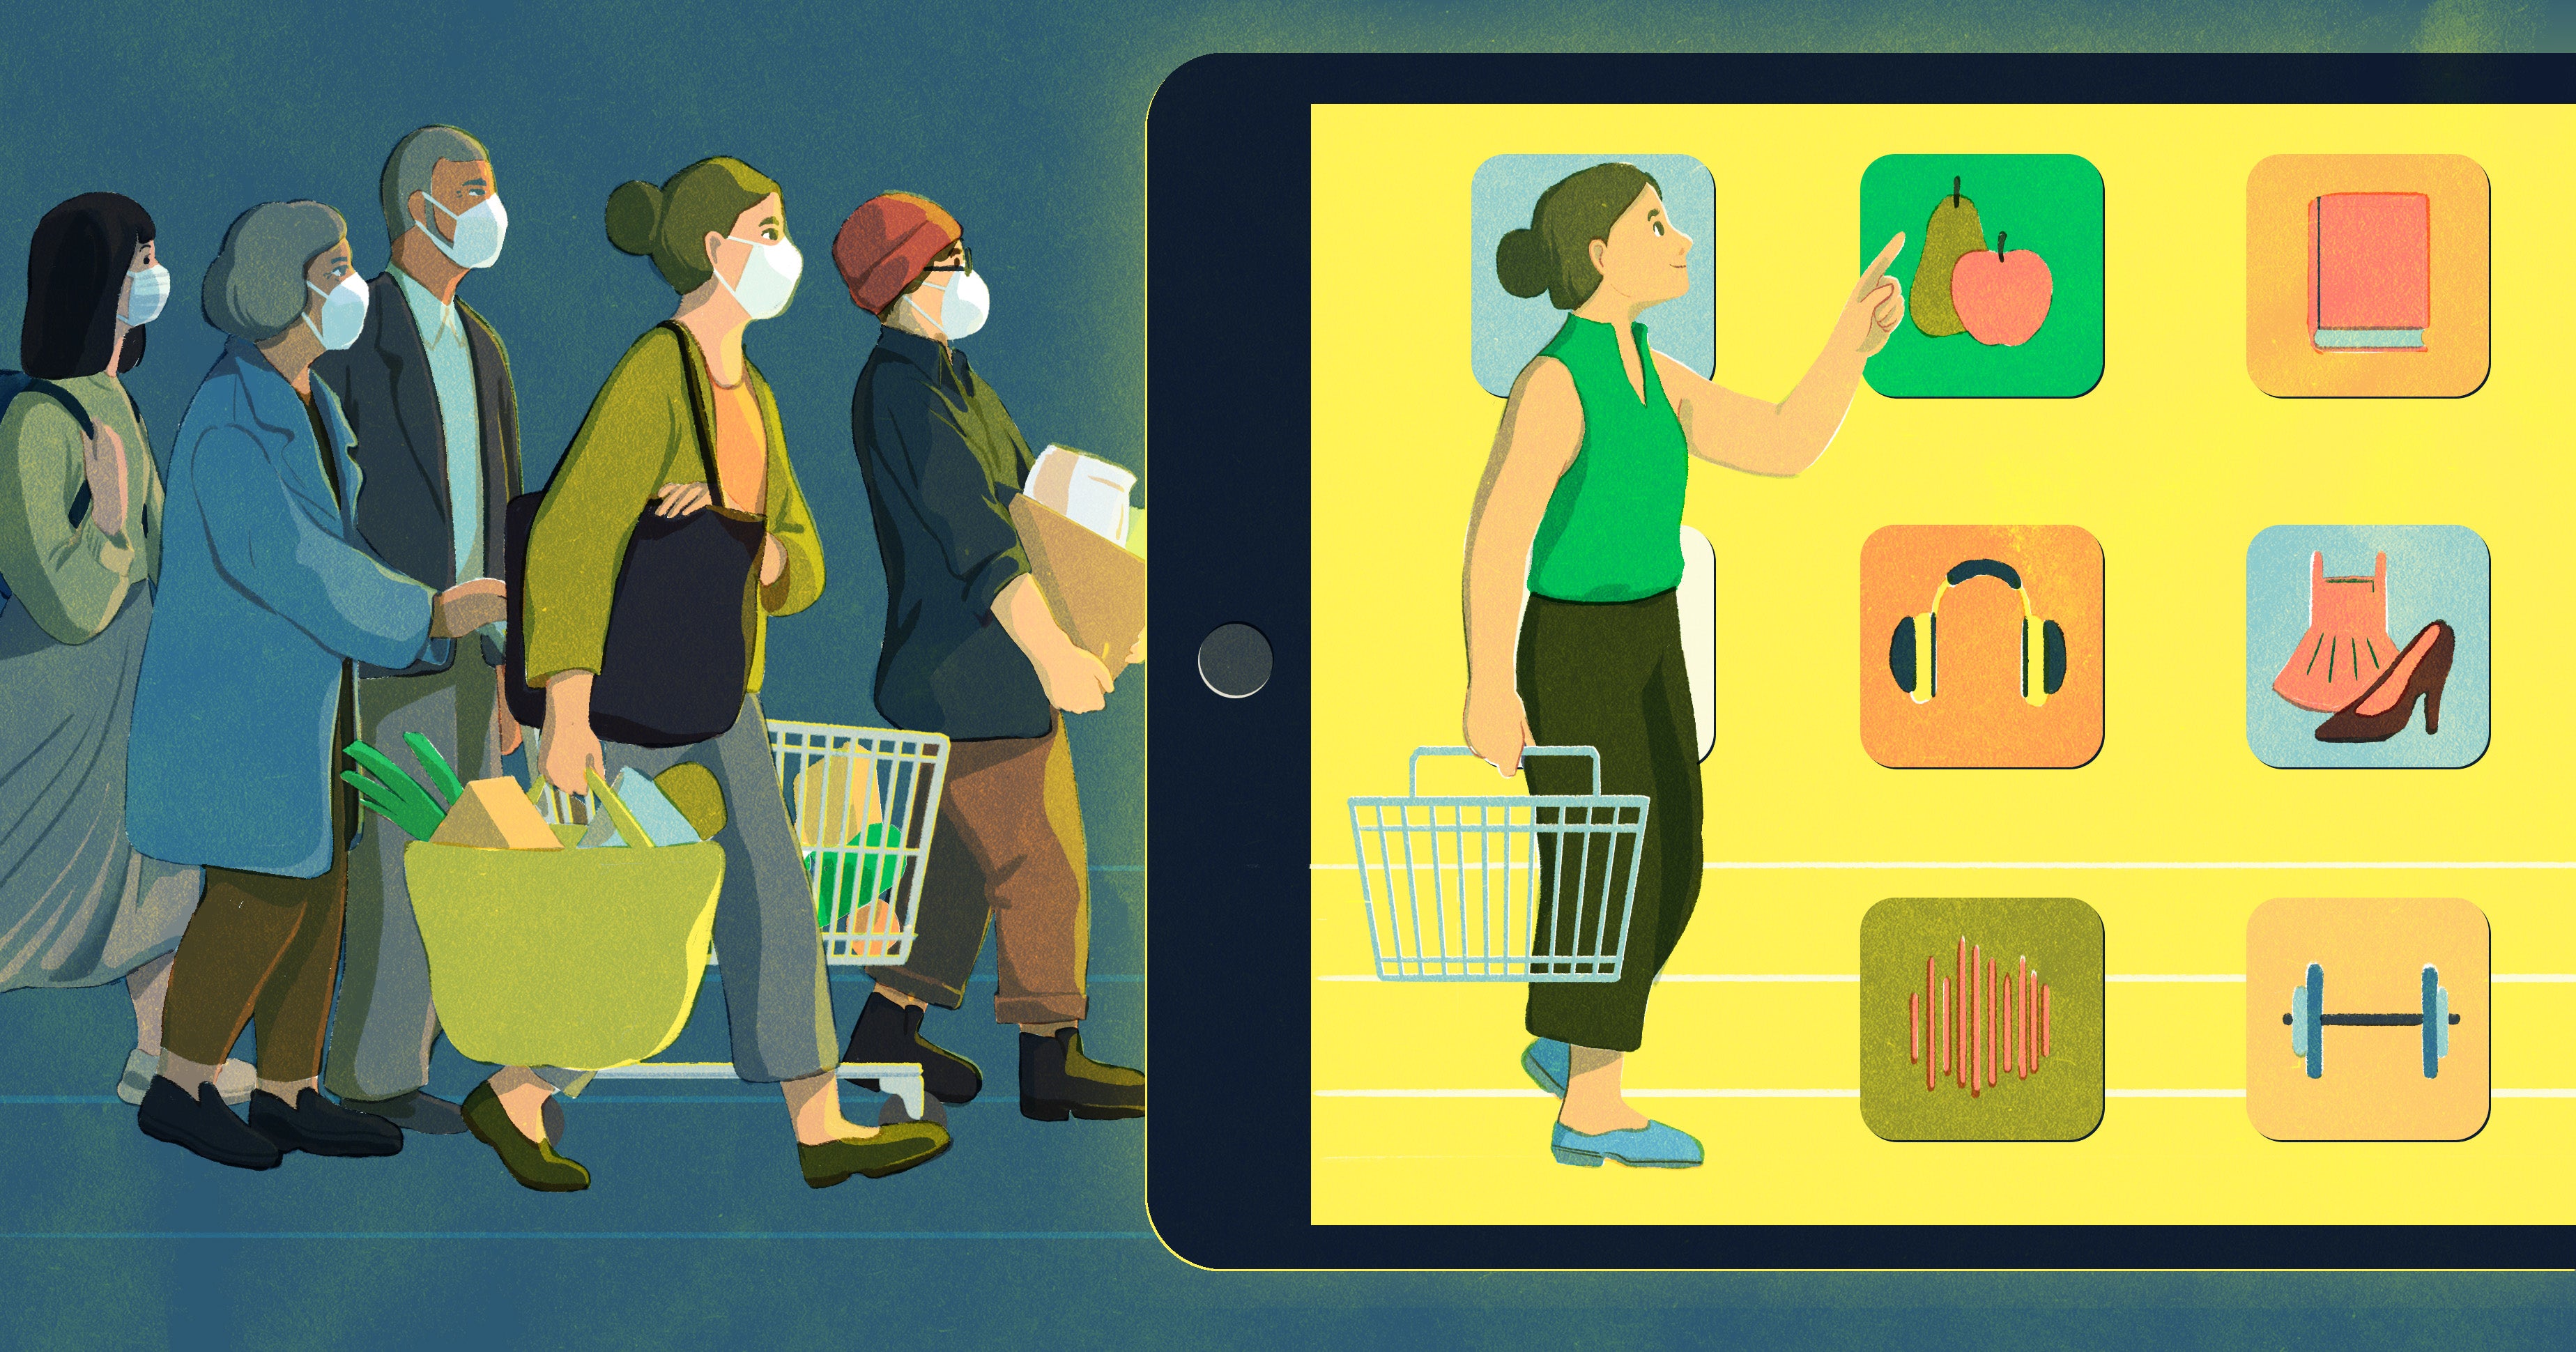 Illustration of a group of people wearing masks entering a store that looks like an iPad screen